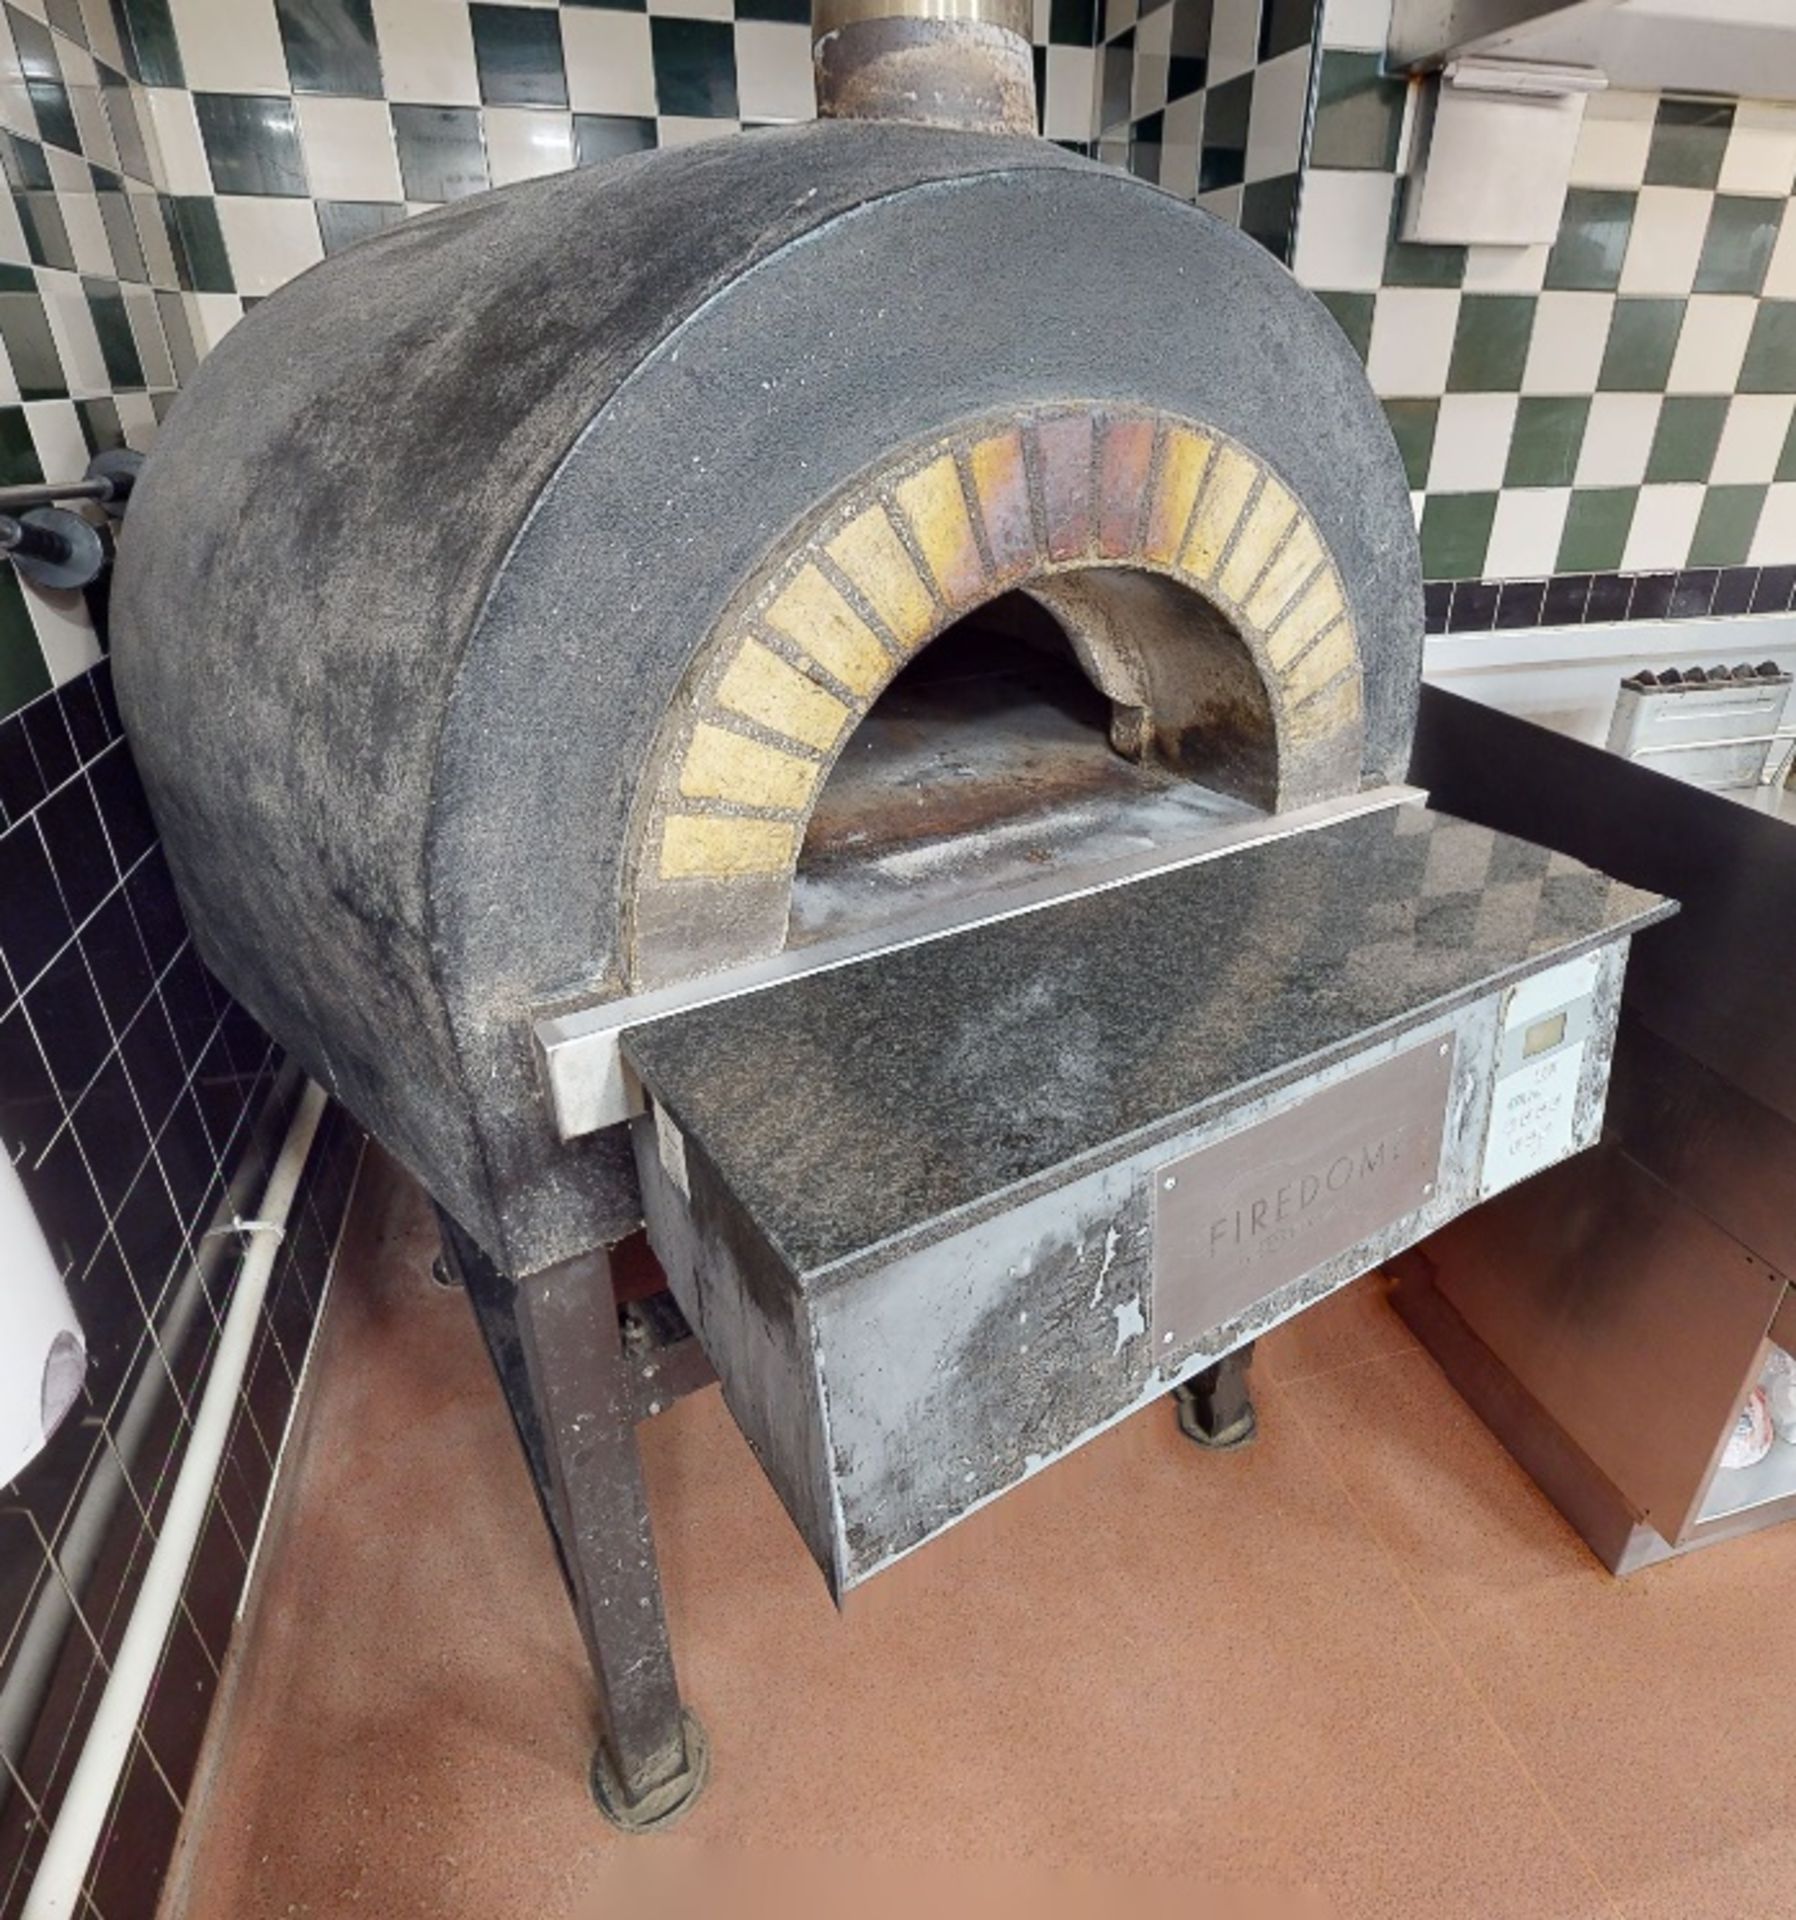 1 x MAM Firedome Commercial Stone Baked Gas Pizza Oven - Made in Italy - Type Modular Fire E - - Image 3 of 8